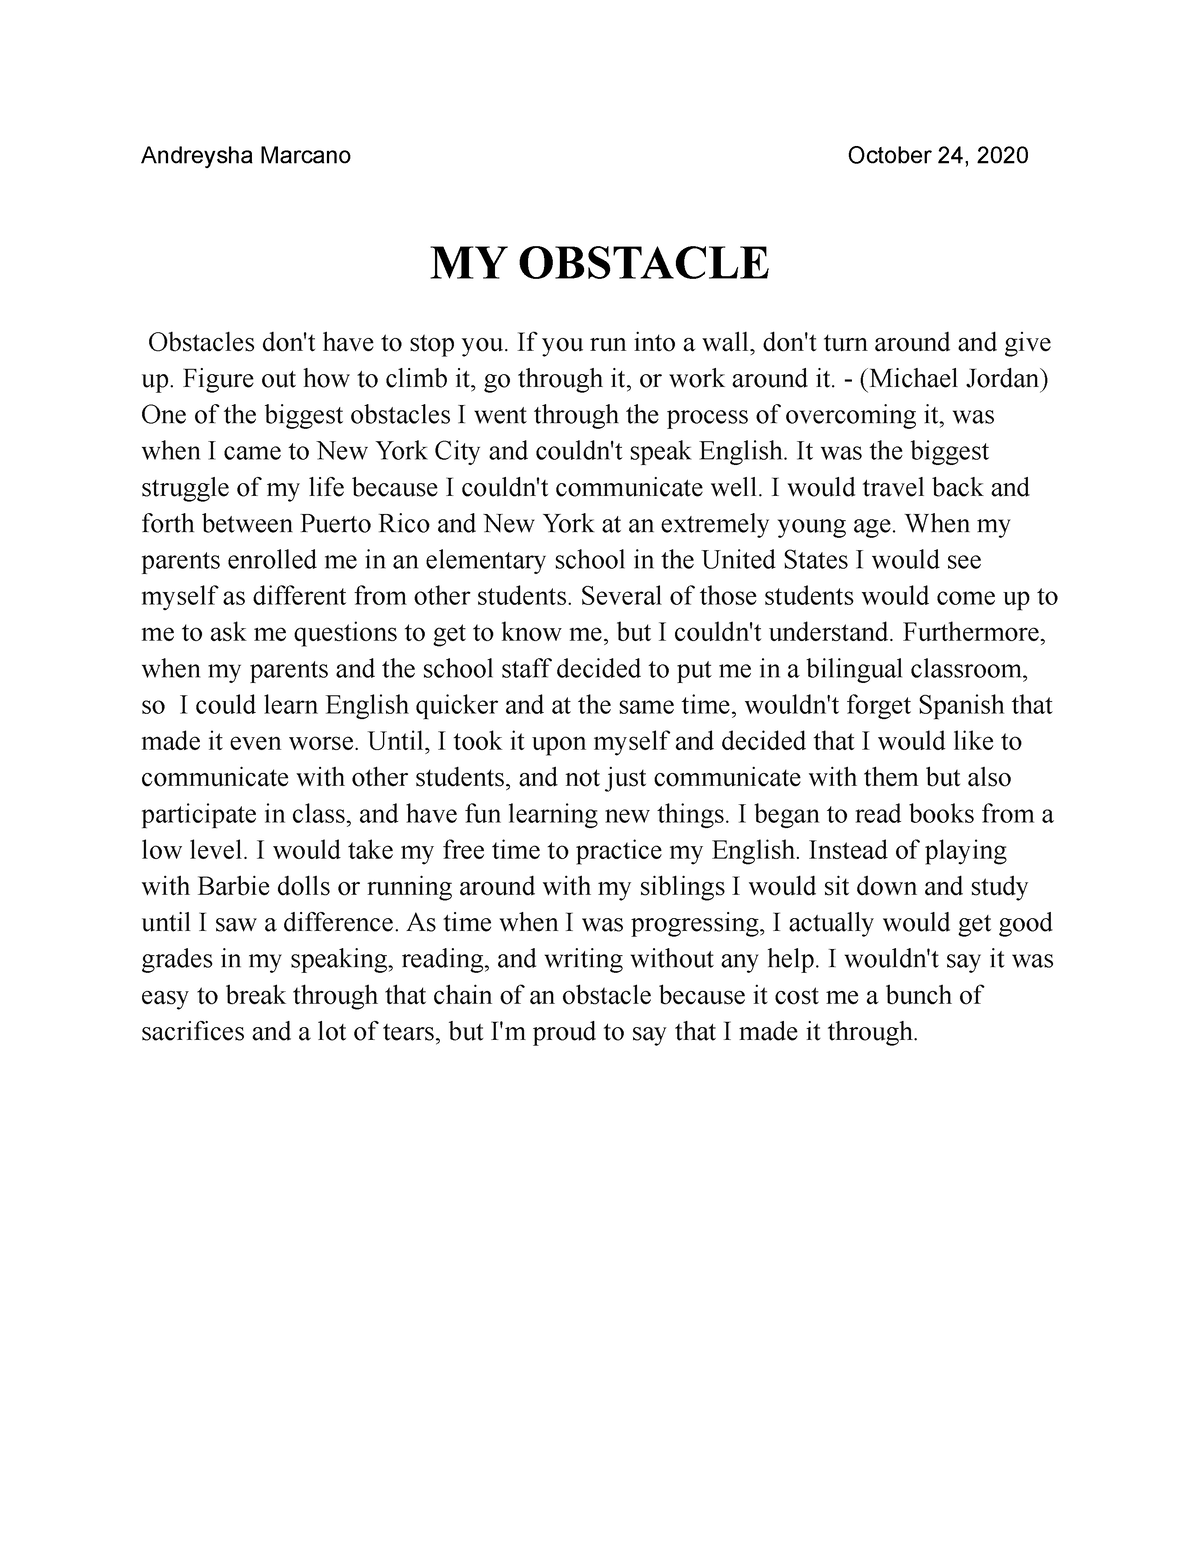 obstacle essay examples